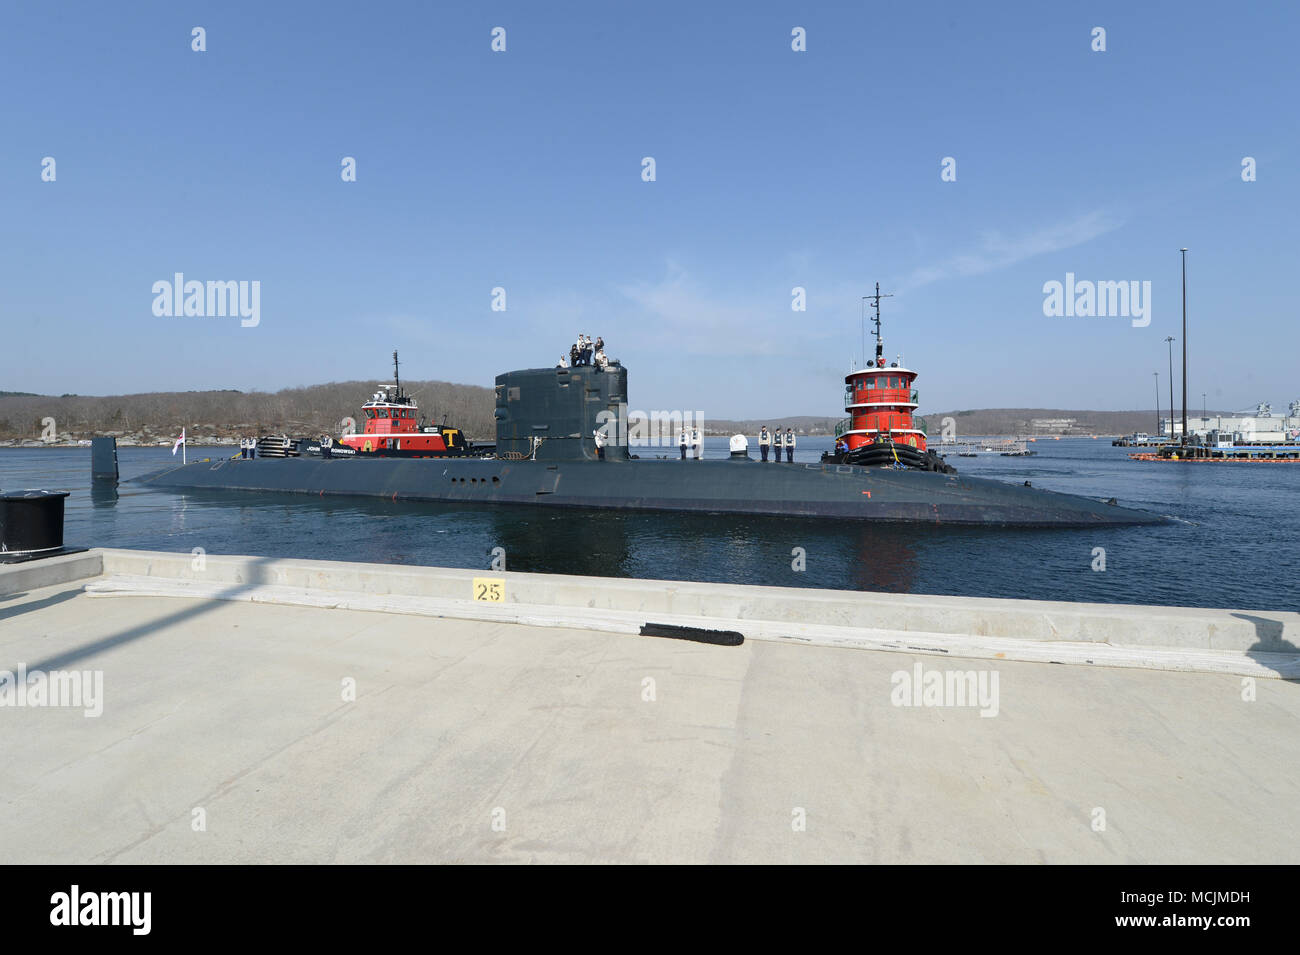 180414-N-LW591-053 GROTON, Conn. (April 14, 2018) The Royal Navy, hunter killer submarine, HMS Trenchant (S-91), approaches the pier at Naval Submarine Base, New London on Saturday, April 14, 2018, for a port visit. Before arriving at Naval Submarine Base, New London the British submarine took part in Ice Exercise 18 (ICEX 2018) along with two U.S. submarines, Los Angeles Class, fast-attack submarine, USS Hartford (SSN-768) and Seawolf Class, fast-attack submarine, USS Connecticut (SSN-22). (U.S. Navy photo by Mass Communication Specialist First Class Steven Hoskins/Released) Stock Photo